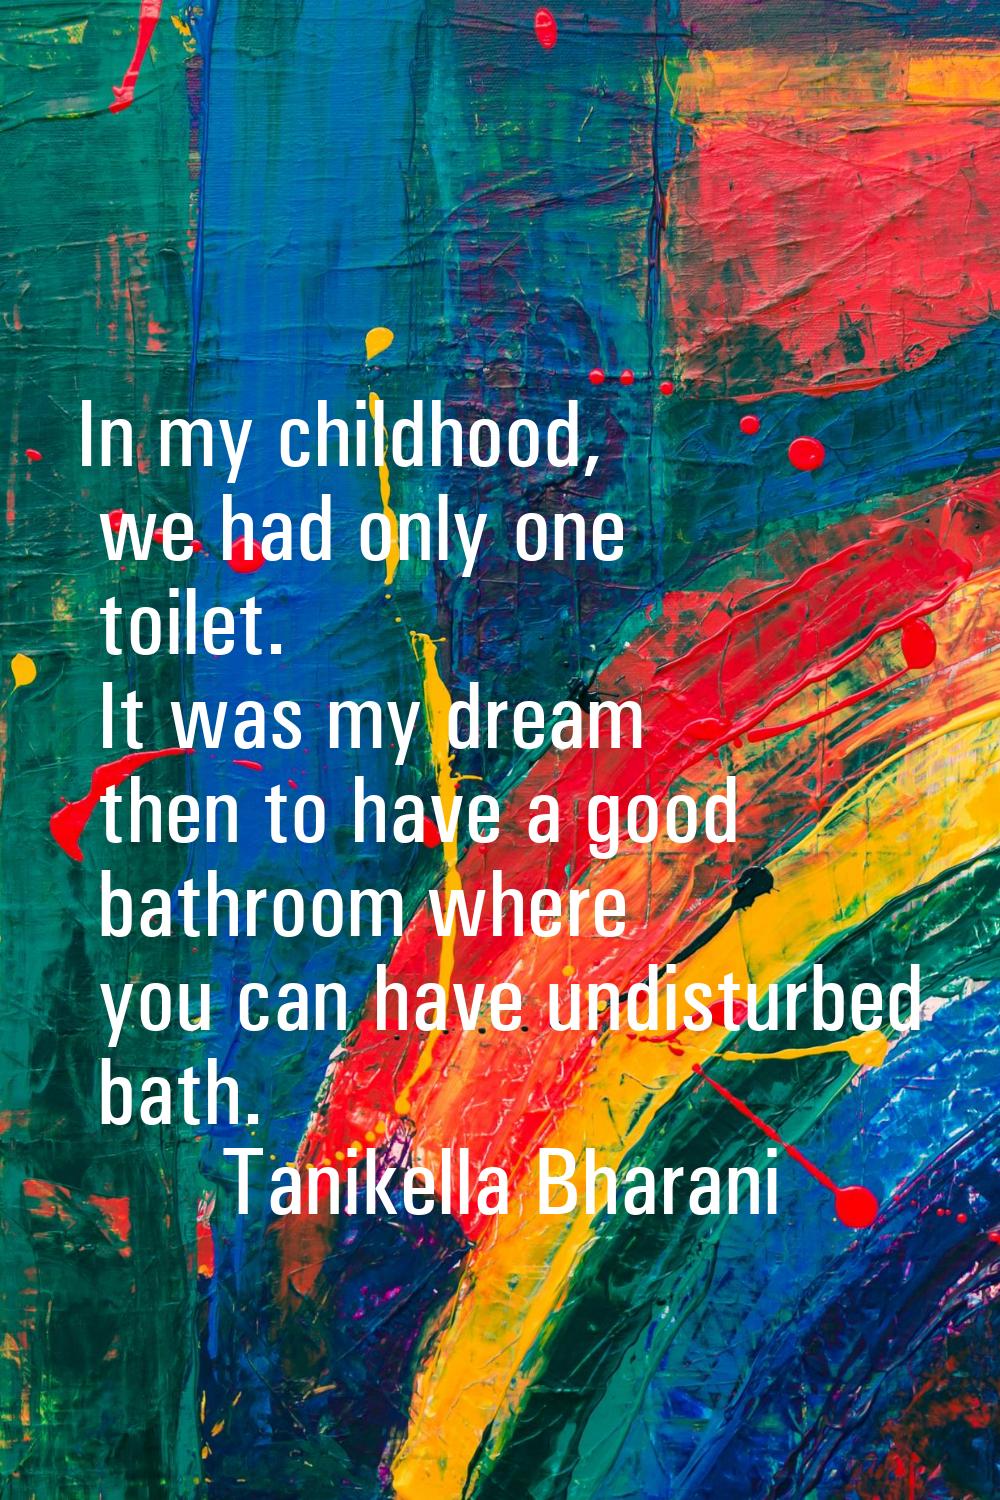 In my childhood, we had only one toilet. It was my dream then to have a good bathroom where you can